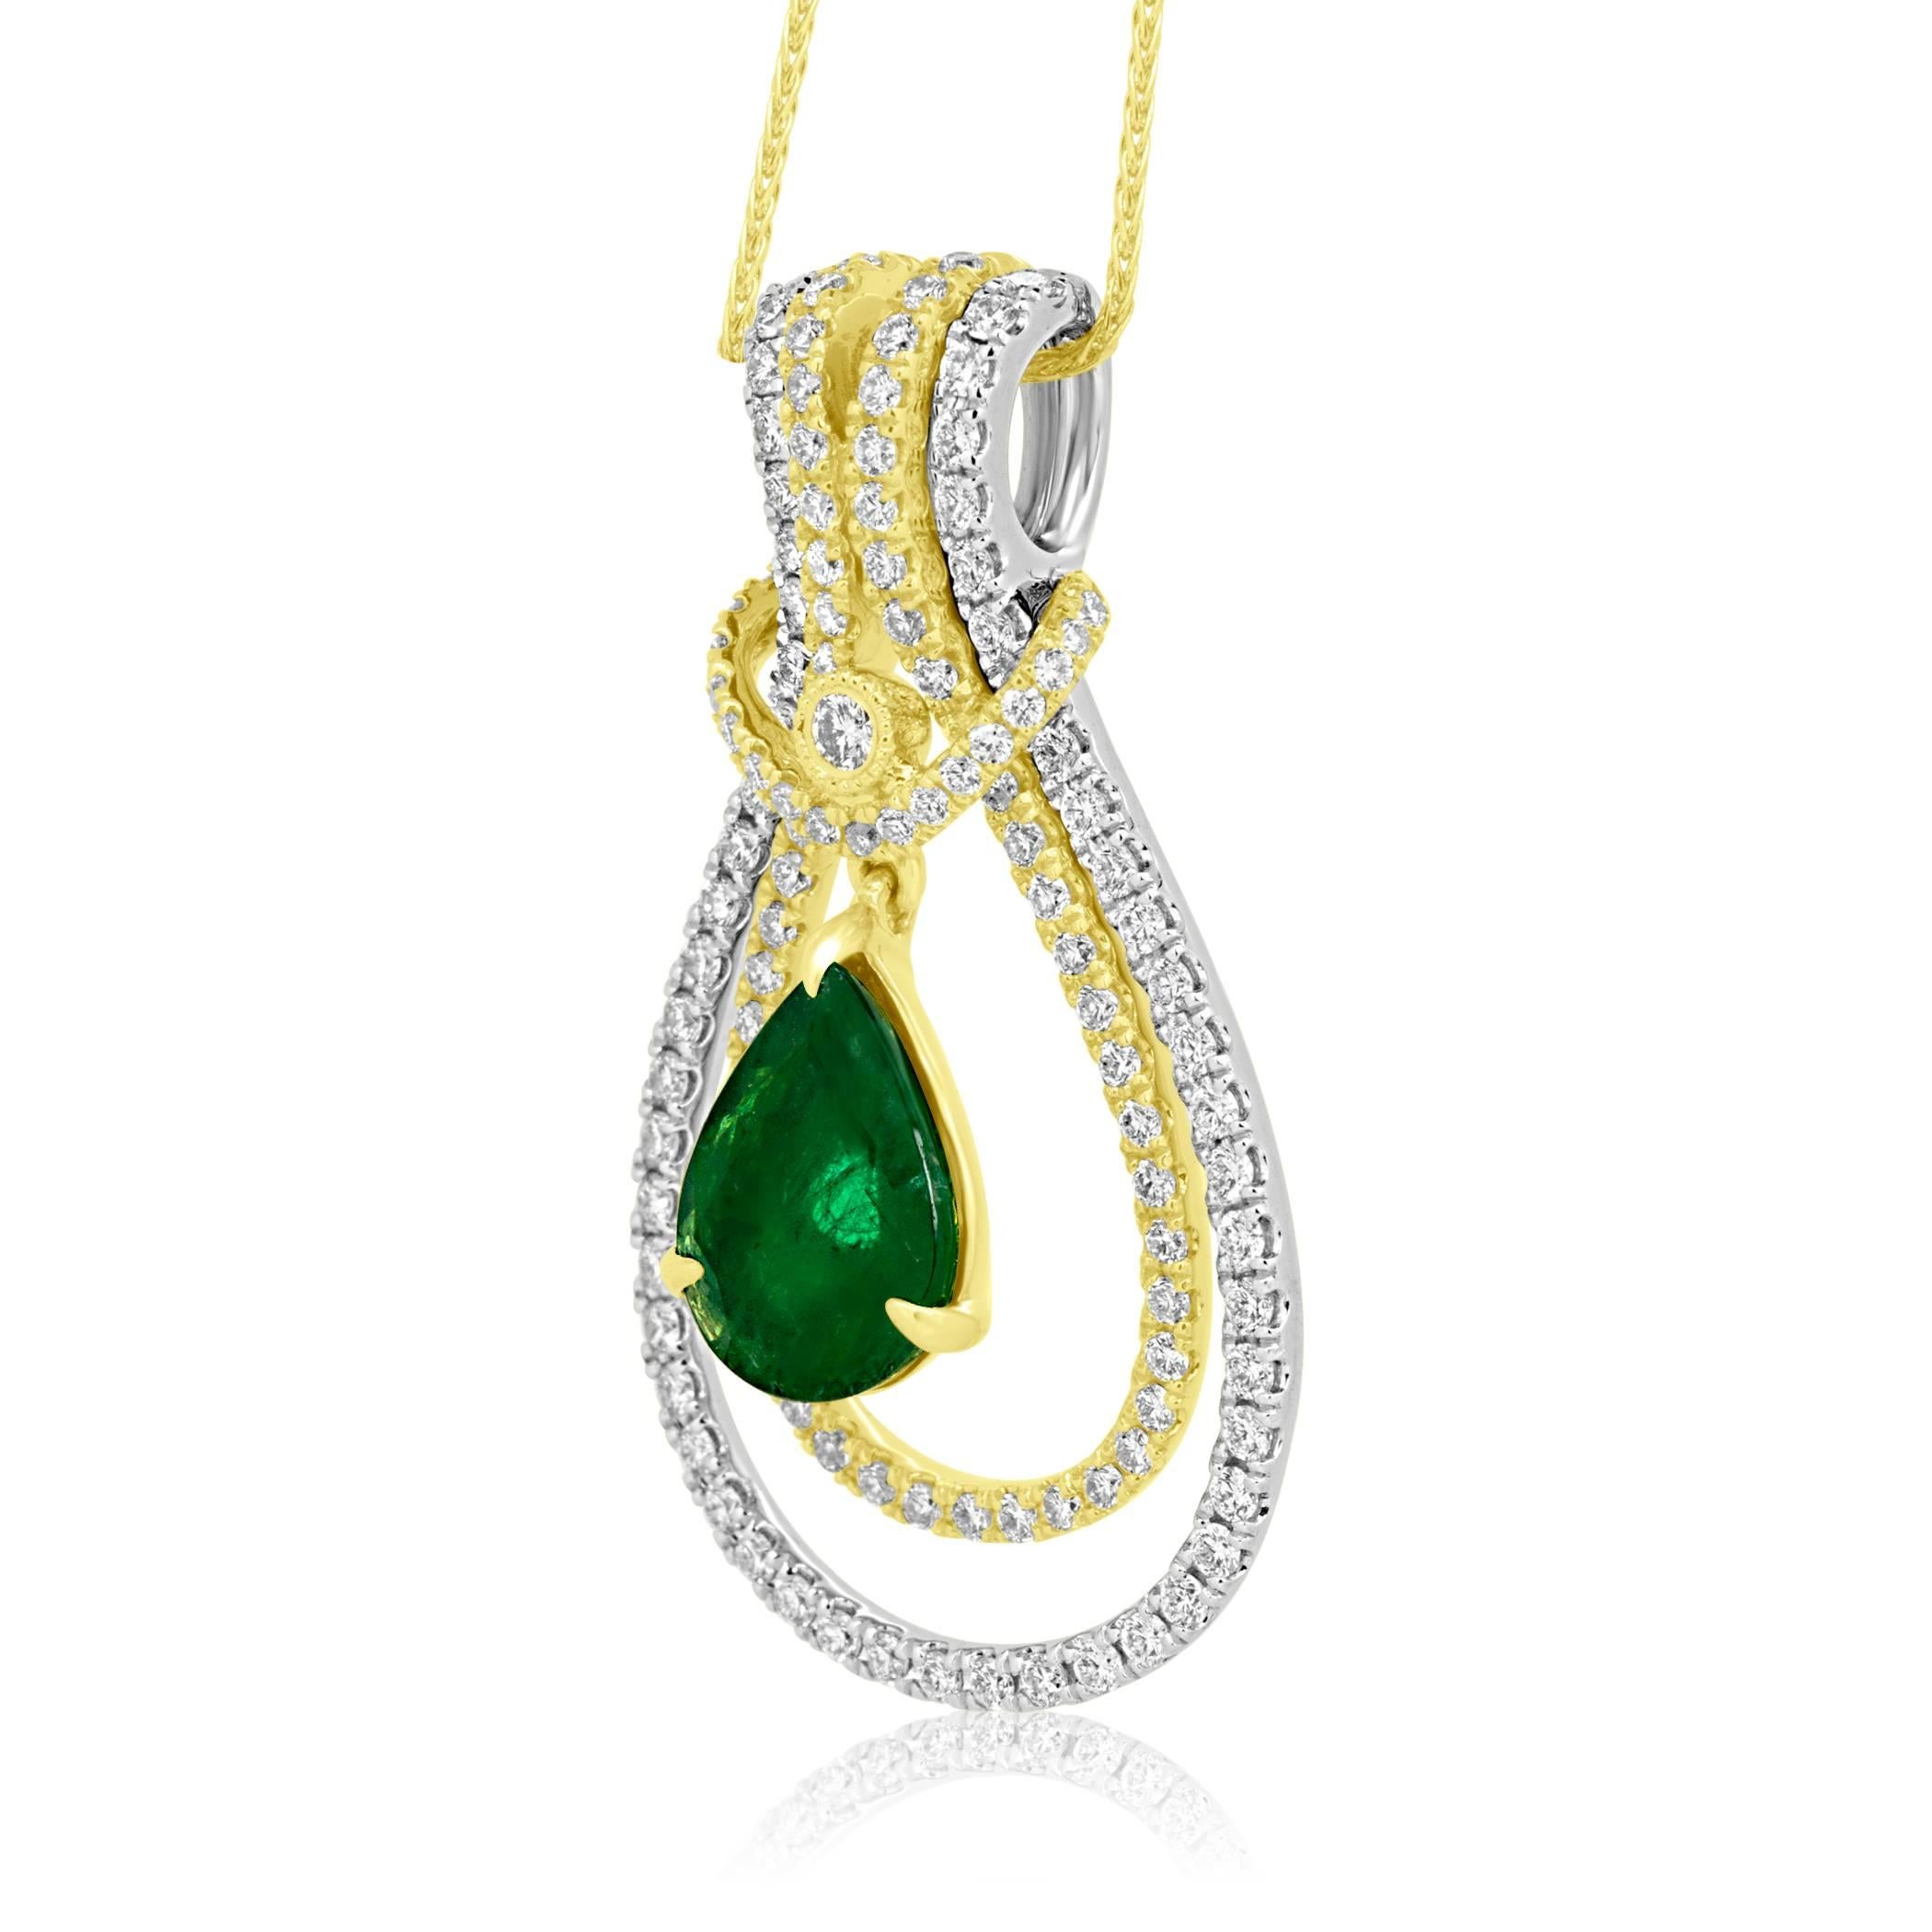 1 Emerald Pearshape 2.00 Carat White Diamond Round 1.16 Carat Interchangeable Pendent can be worn three ways as three pendents in 18K White and yellow Gold comes with Italian Spiga adjustable 18K Yellow Gold chain.